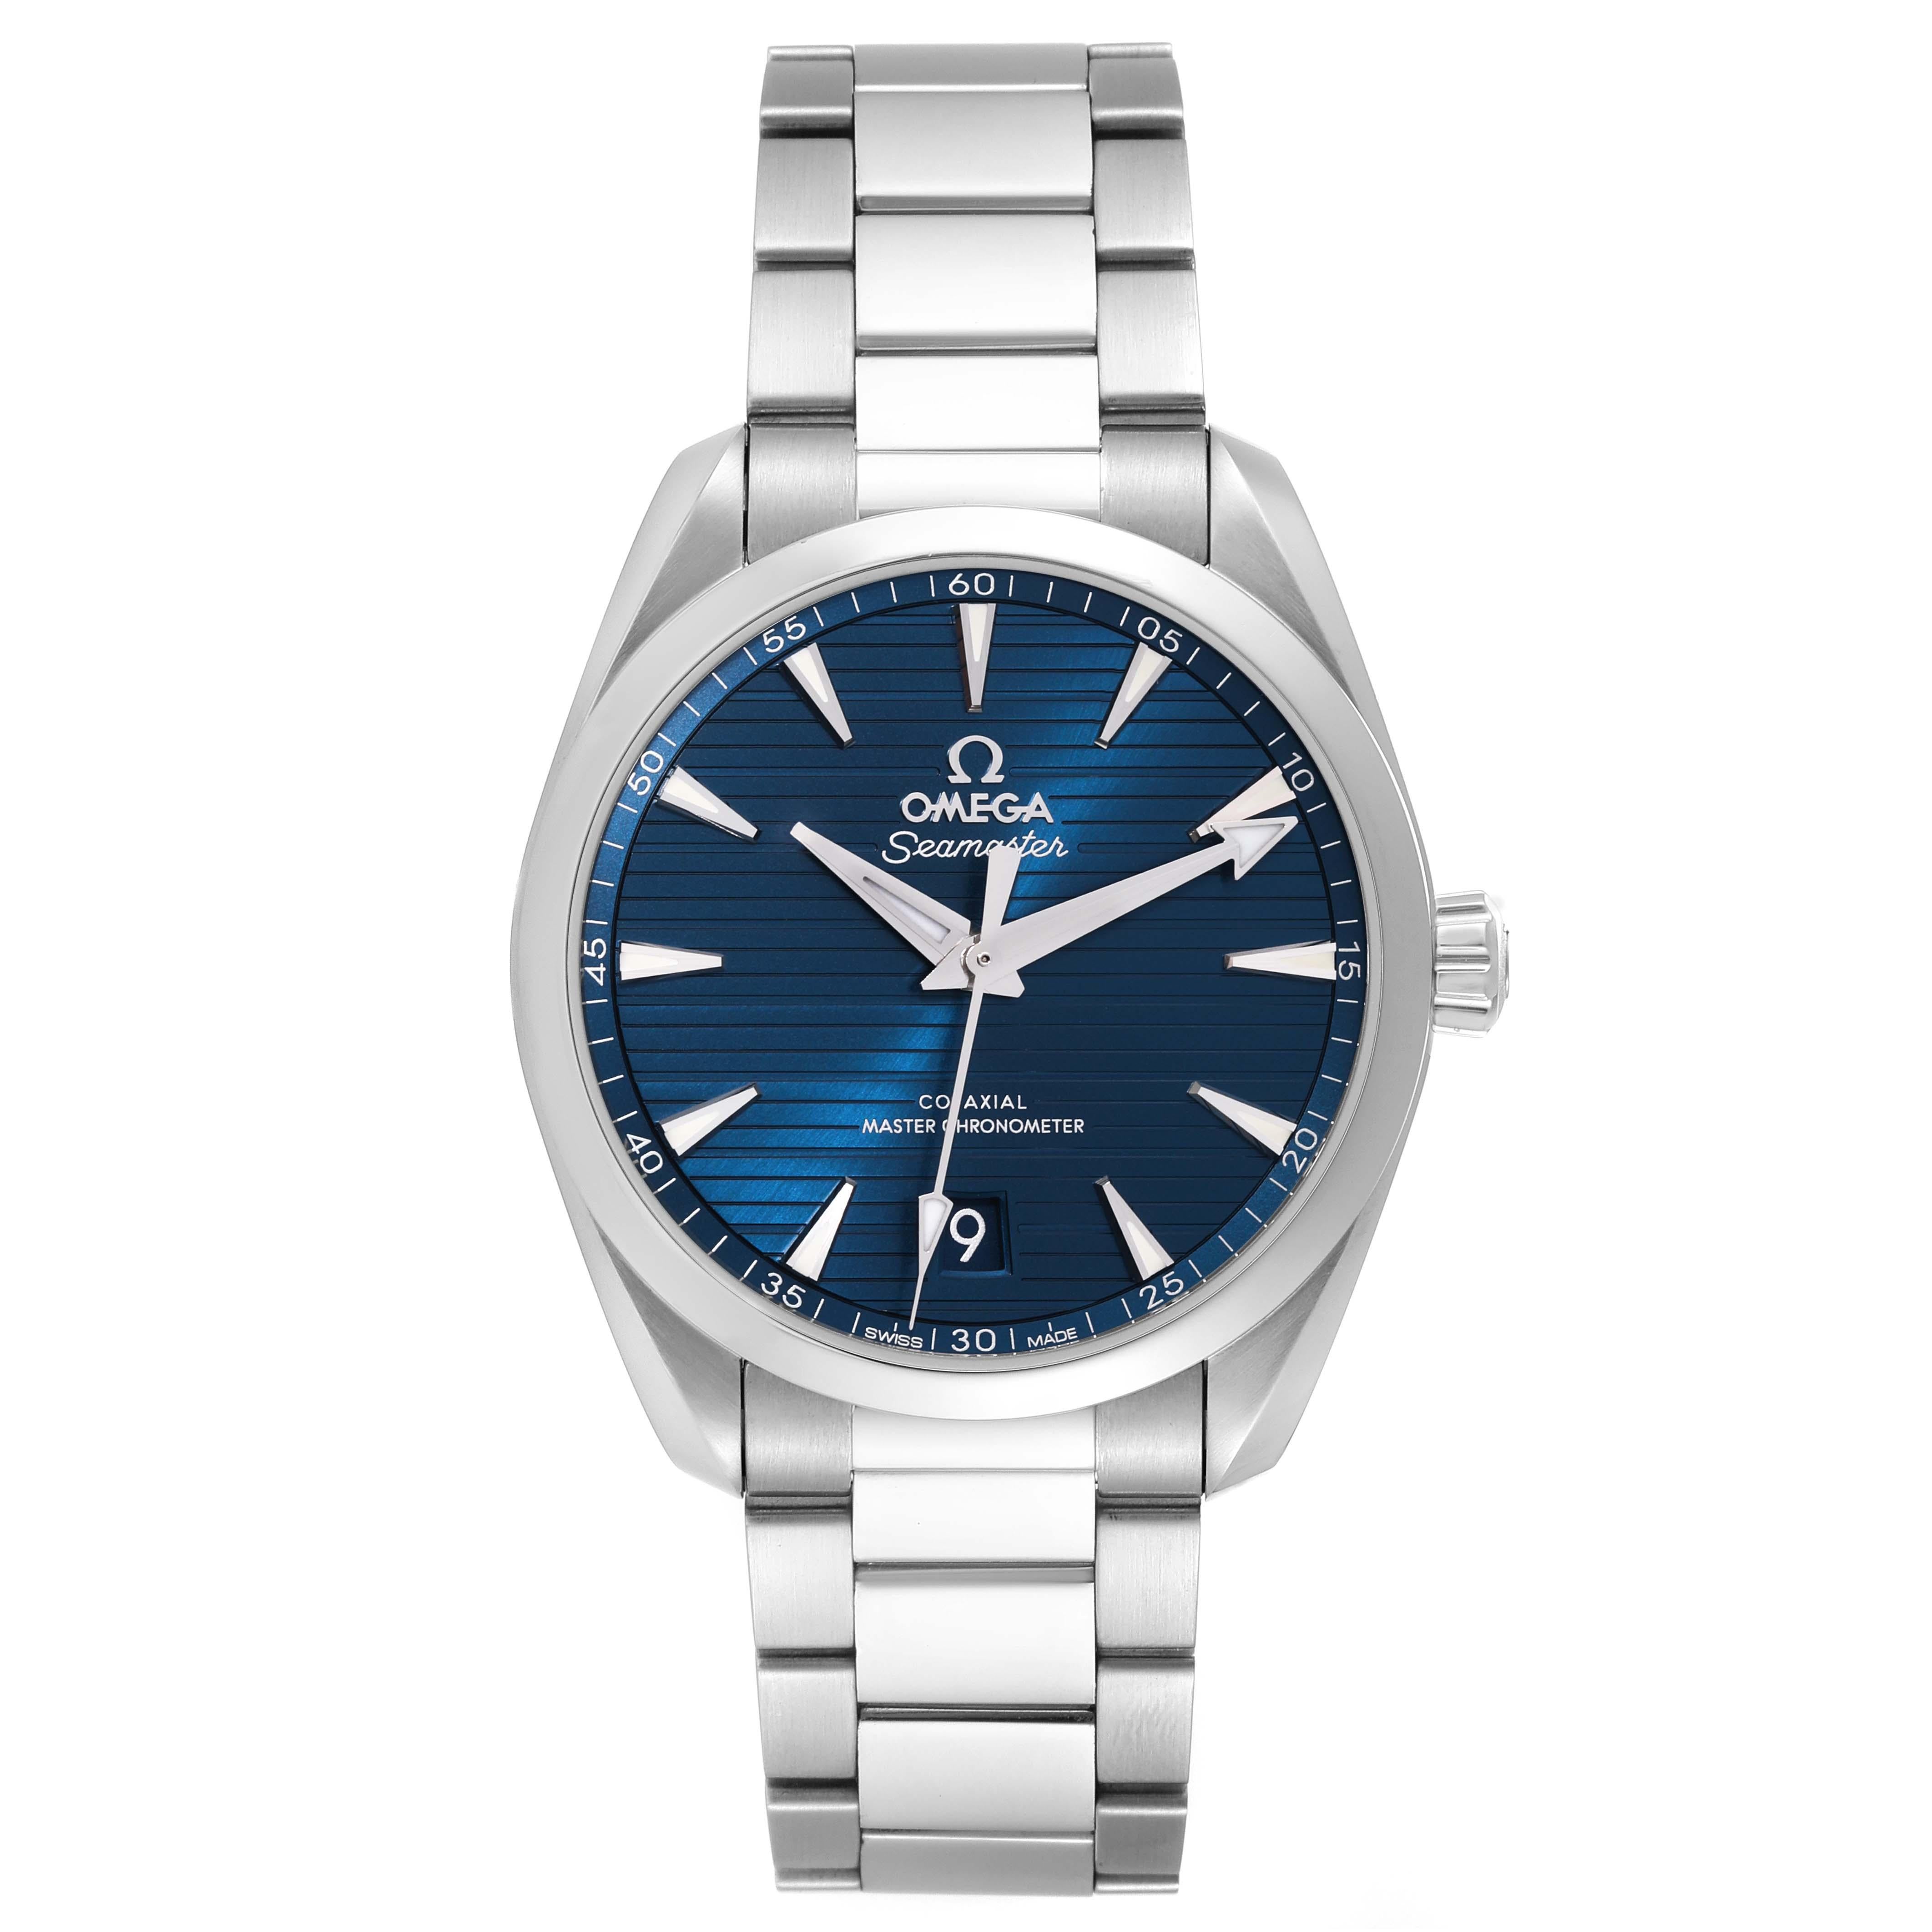 Omega Seamaster Aqua Terra Steel Mens Watch 220.10.38.20.03.001 Card. Automatic self-winding movement. Stainless steel round case 38.5 mm in diameter. Transparent exhibition sapphire crystal caseback. Stainless steel smooth bezel. Scratch resistant